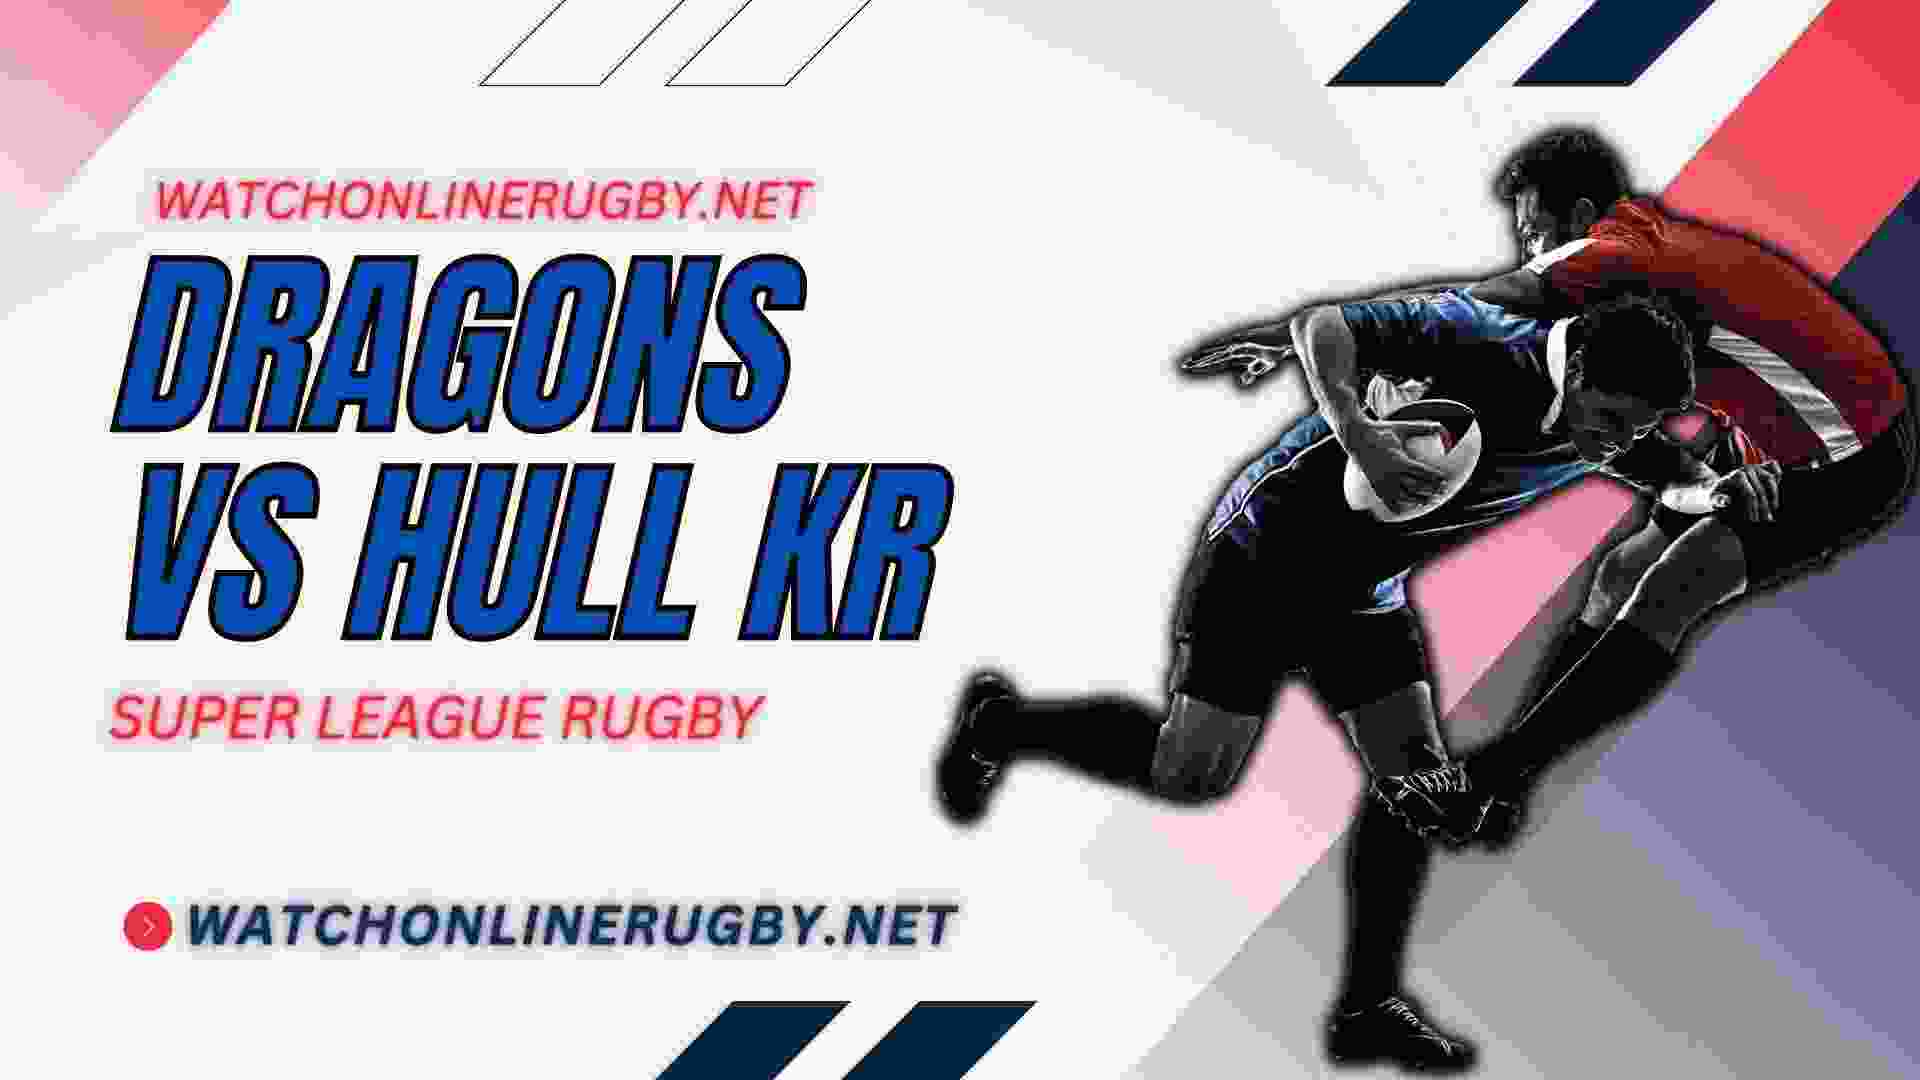 Catalans VS Hull Kingston Rugby Live Stream